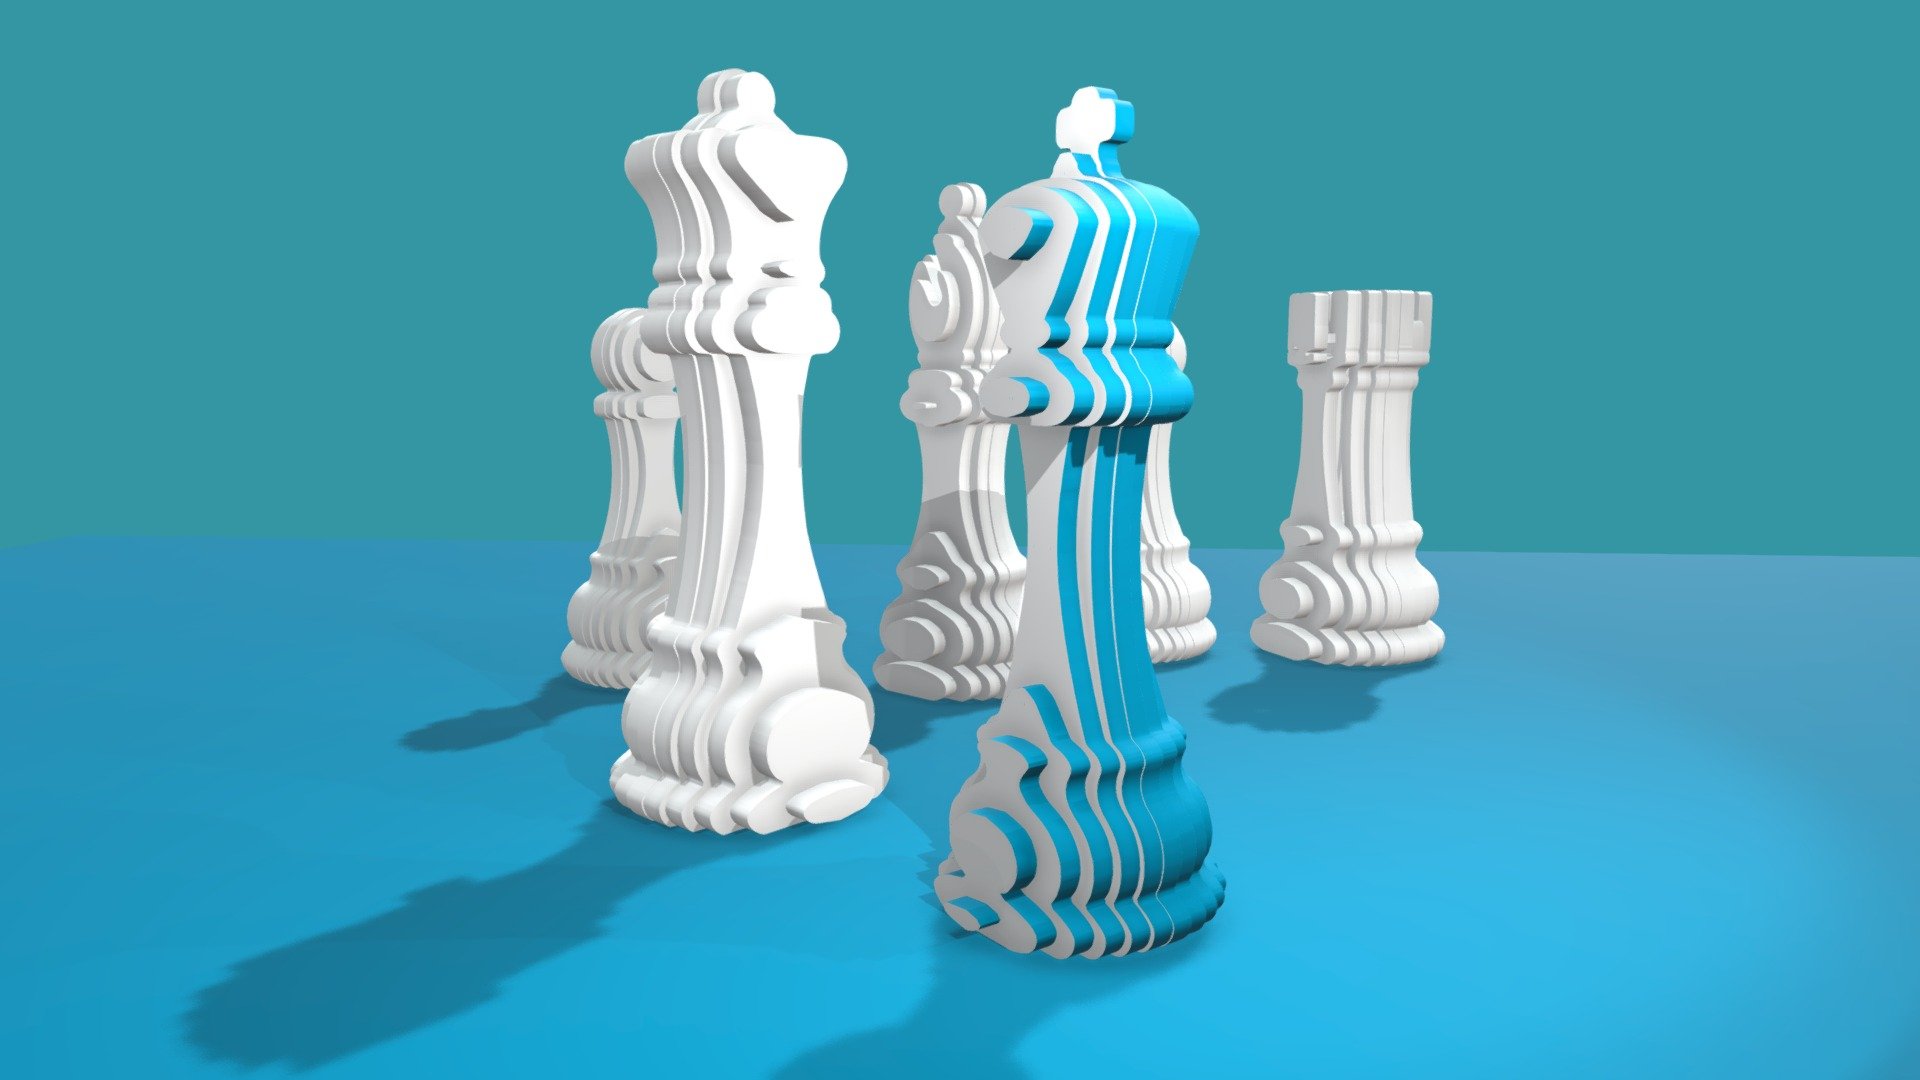 Chess Pieces On Blue Background Wallpaper Image For Free Download - Pngtree